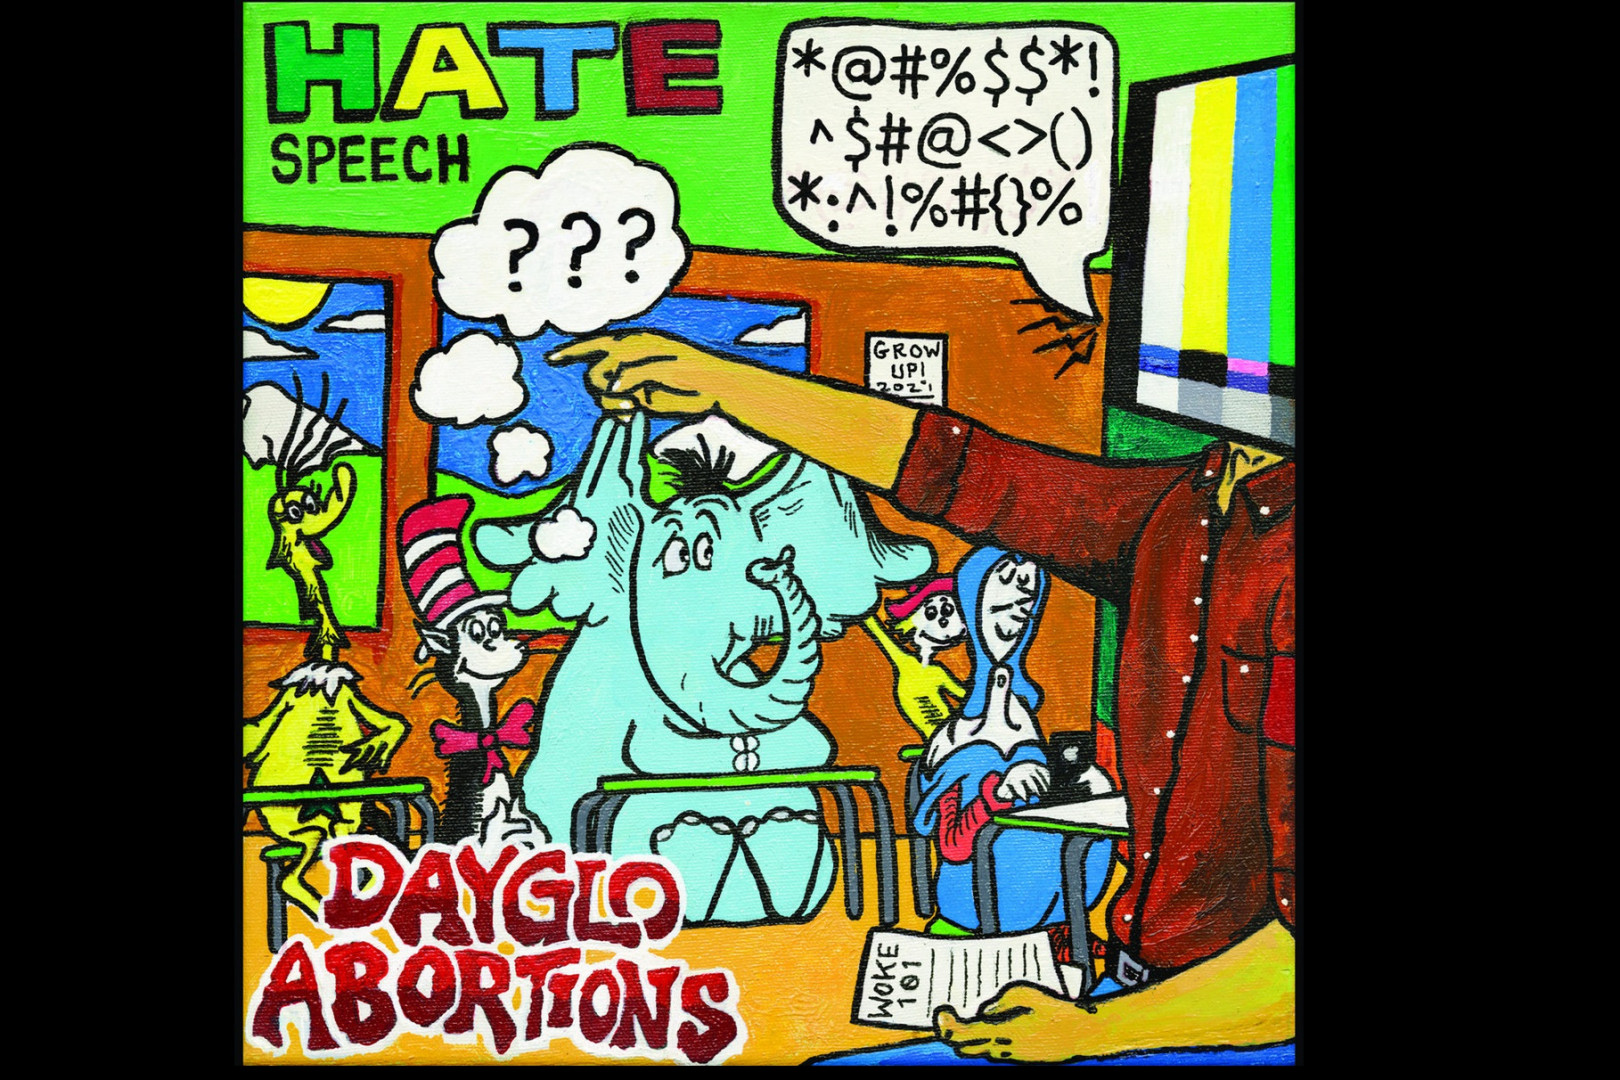 Dayglo Abortions have a new album coming out... here's the first track!